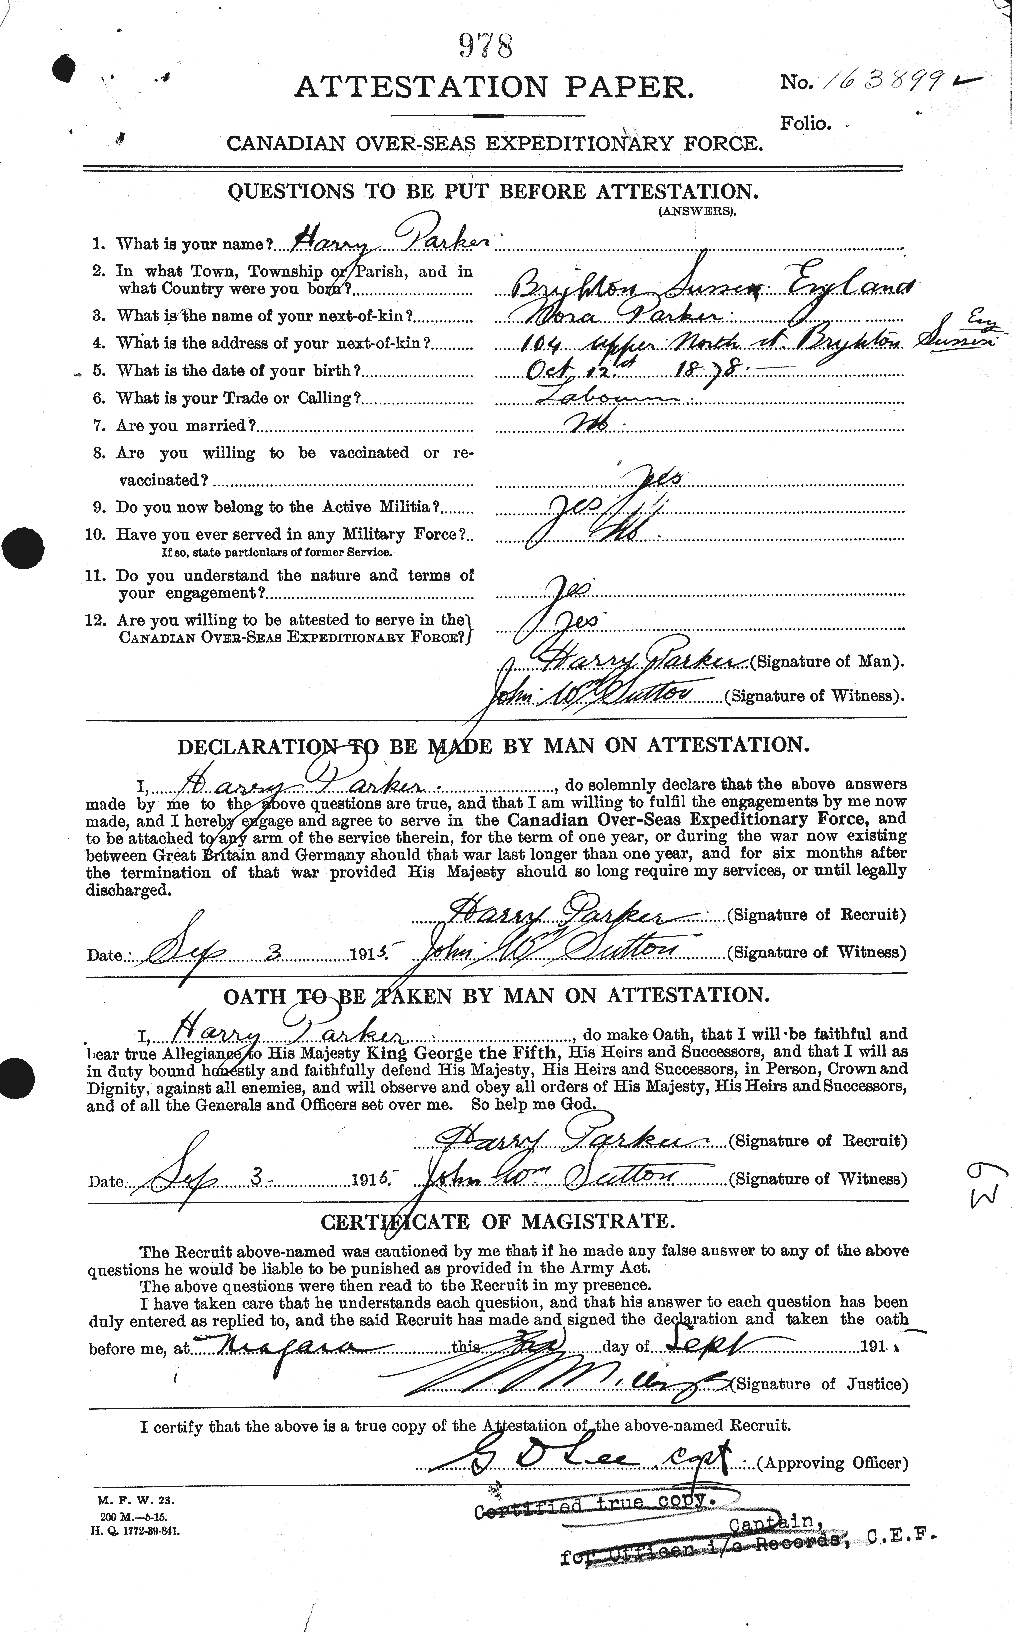 Personnel Records of the First World War - CEF 565319a